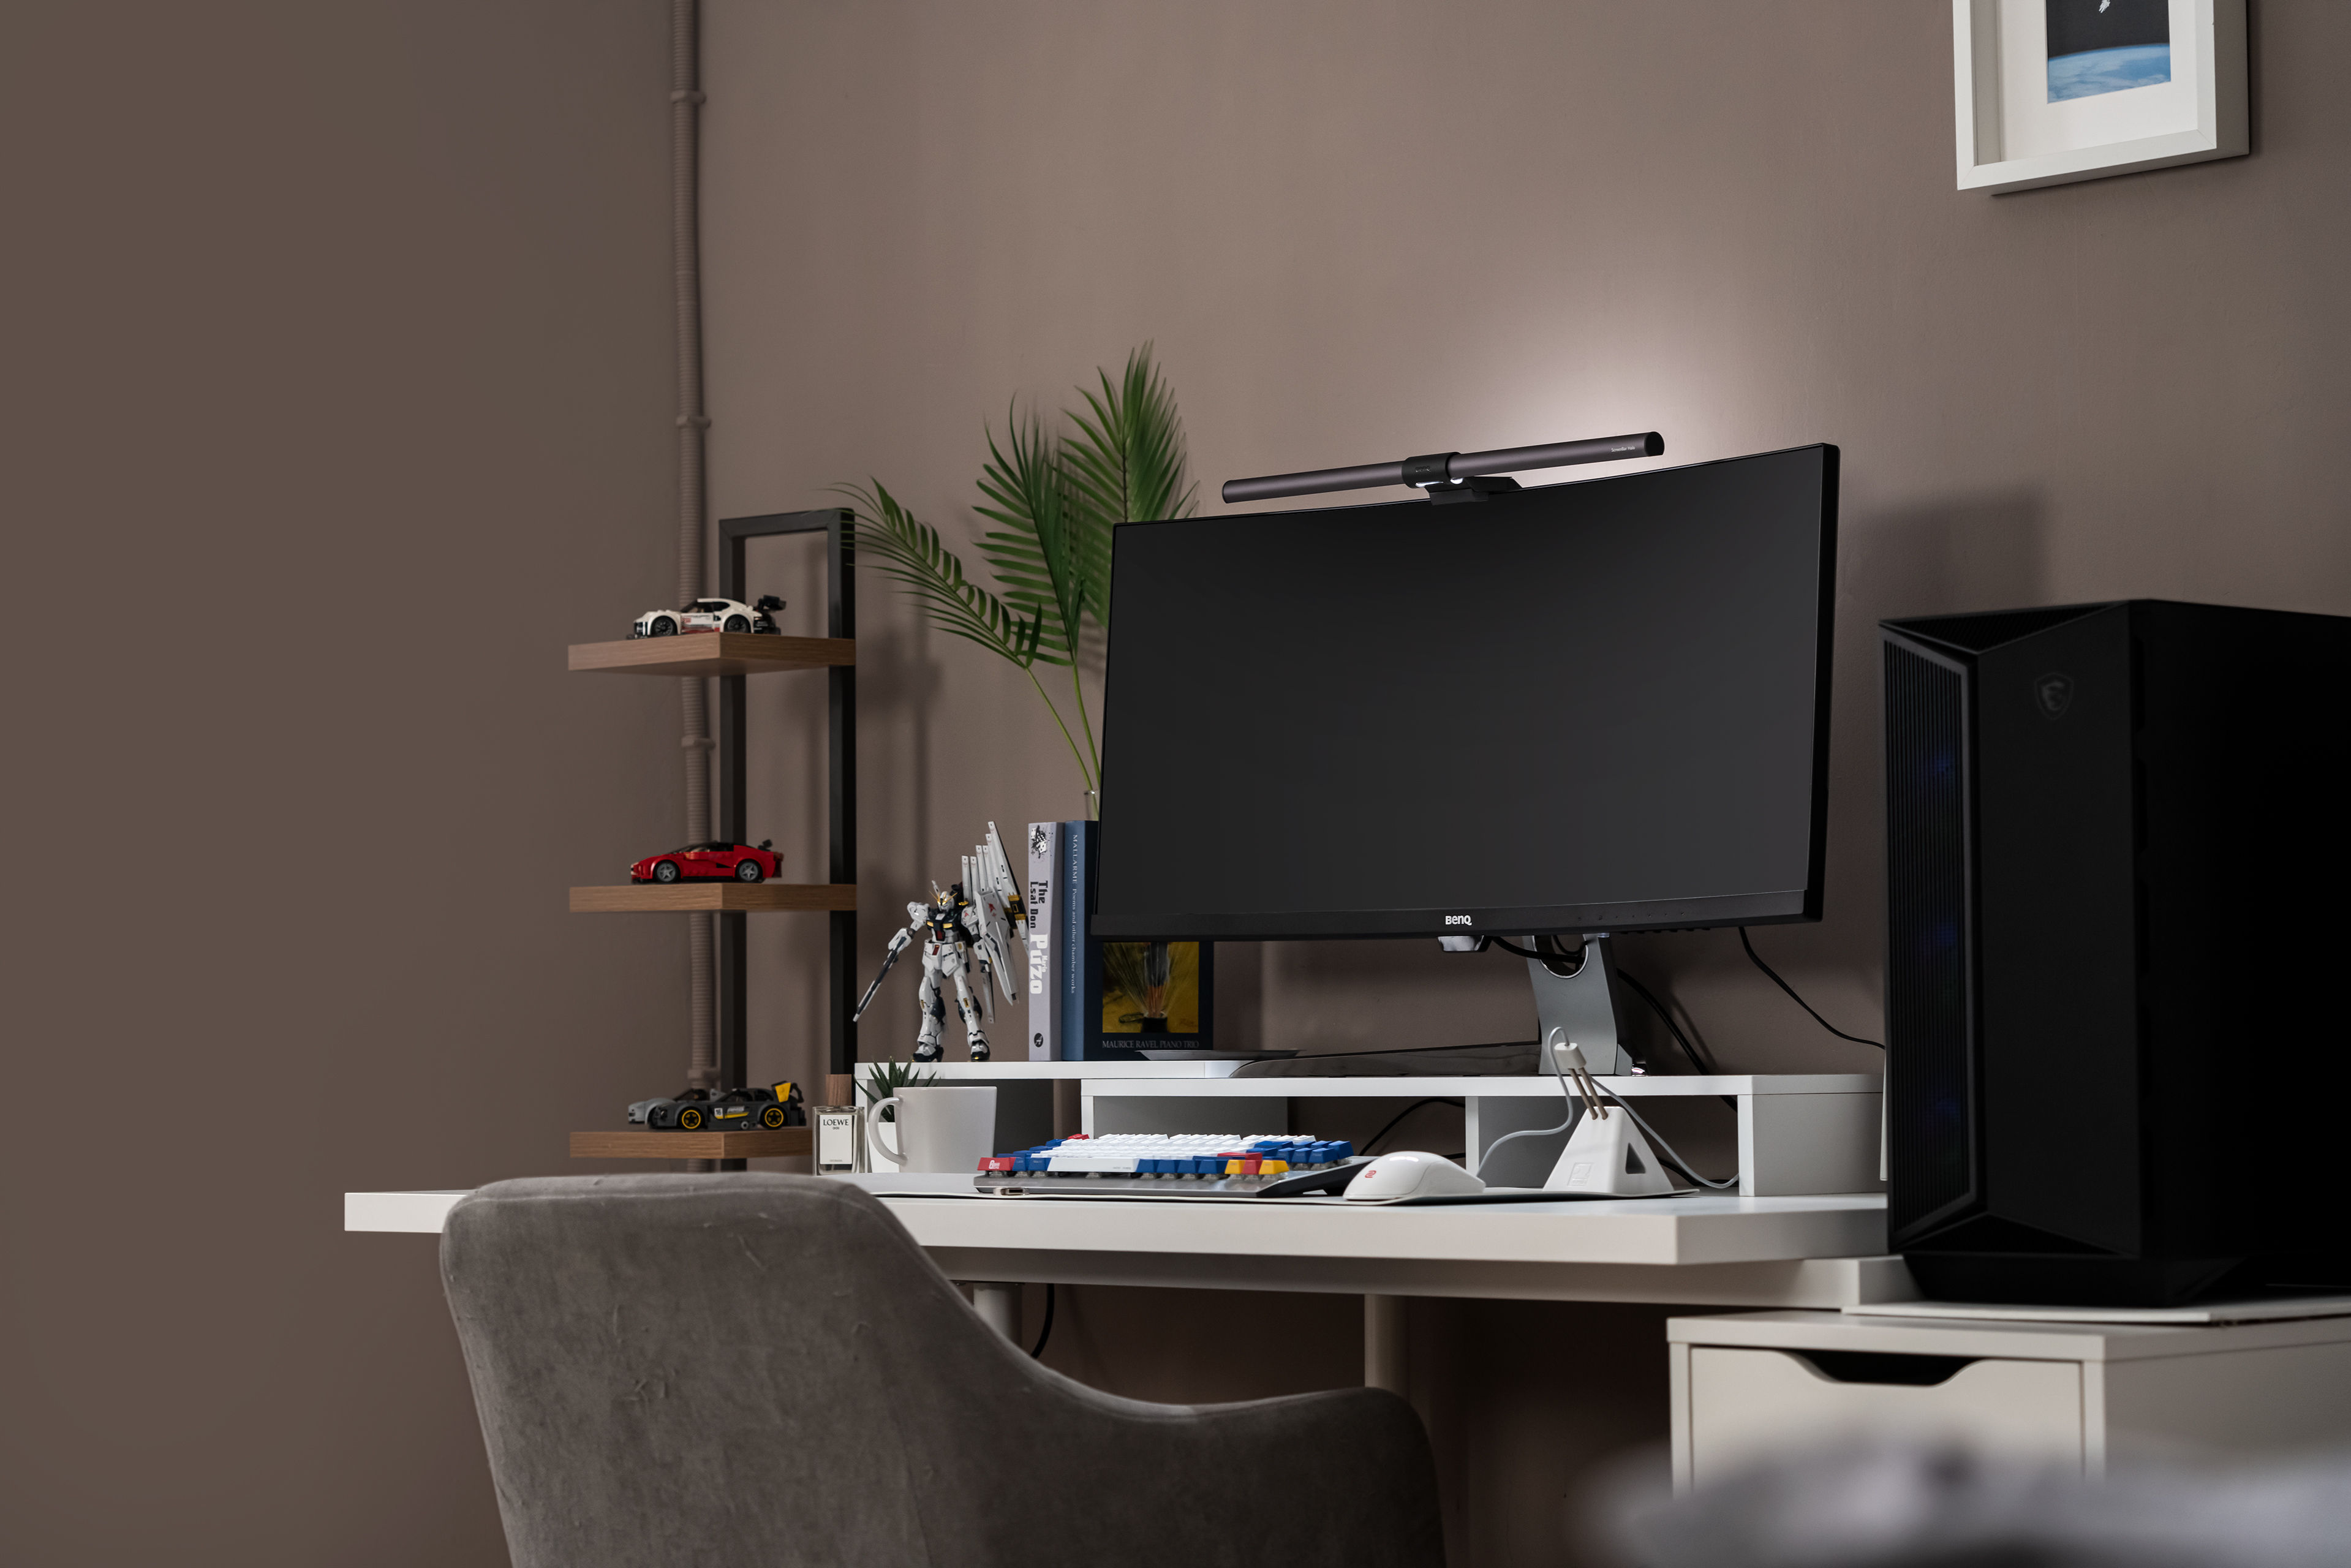 The best monitor light for you to relieve eye strain